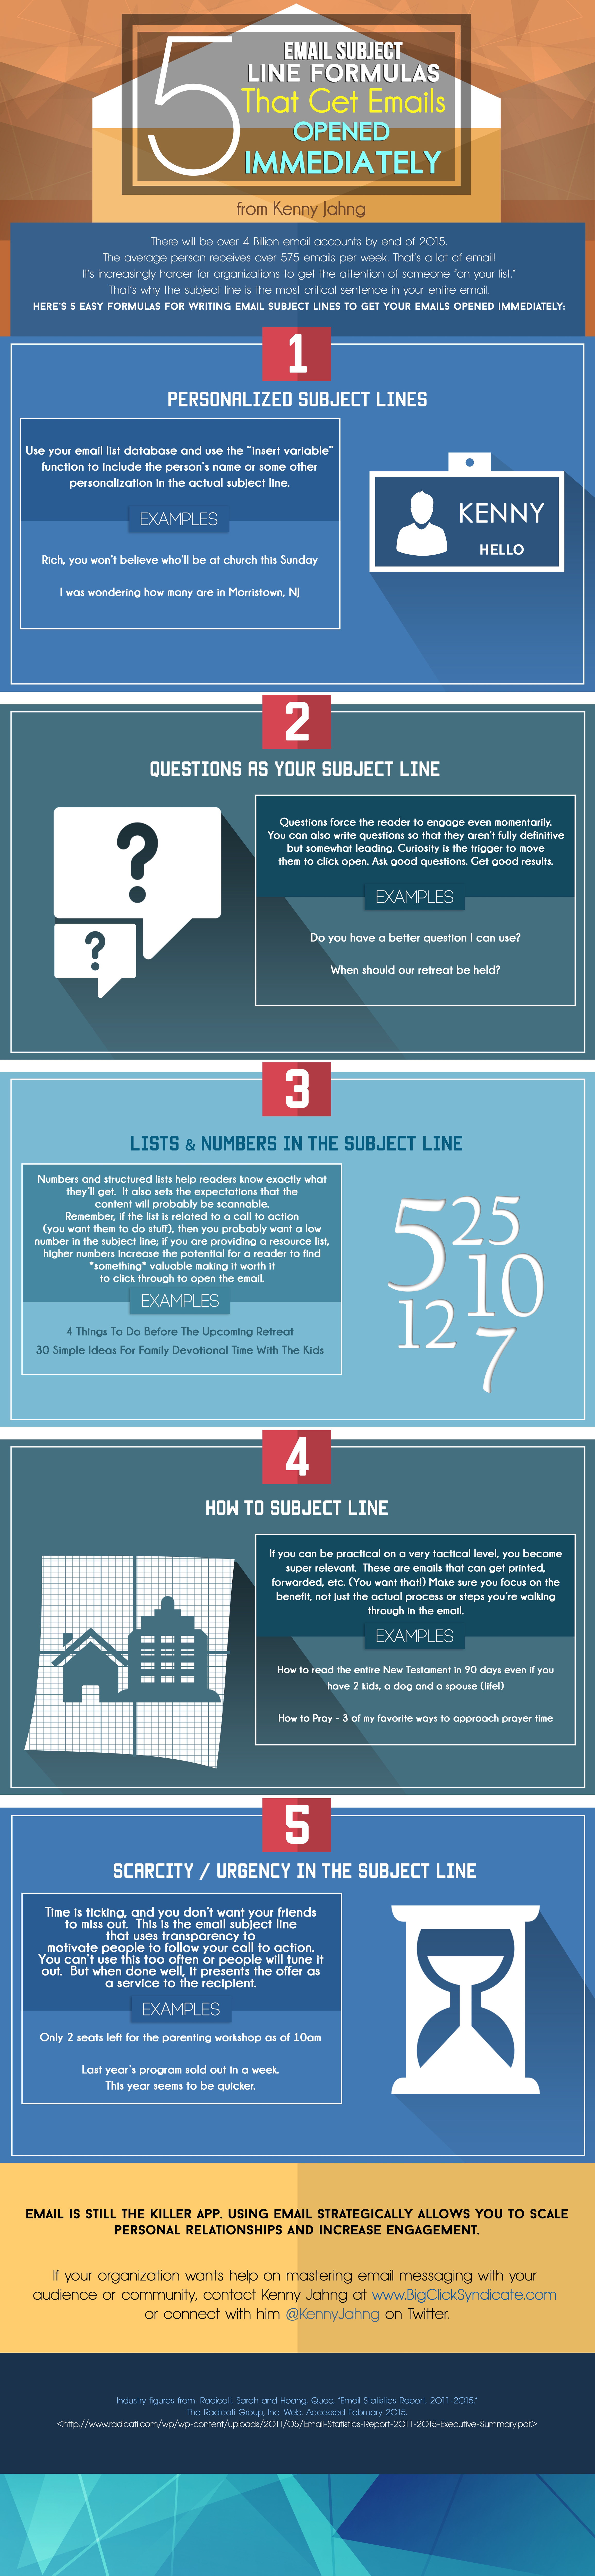 Email subject line copywriting infographic